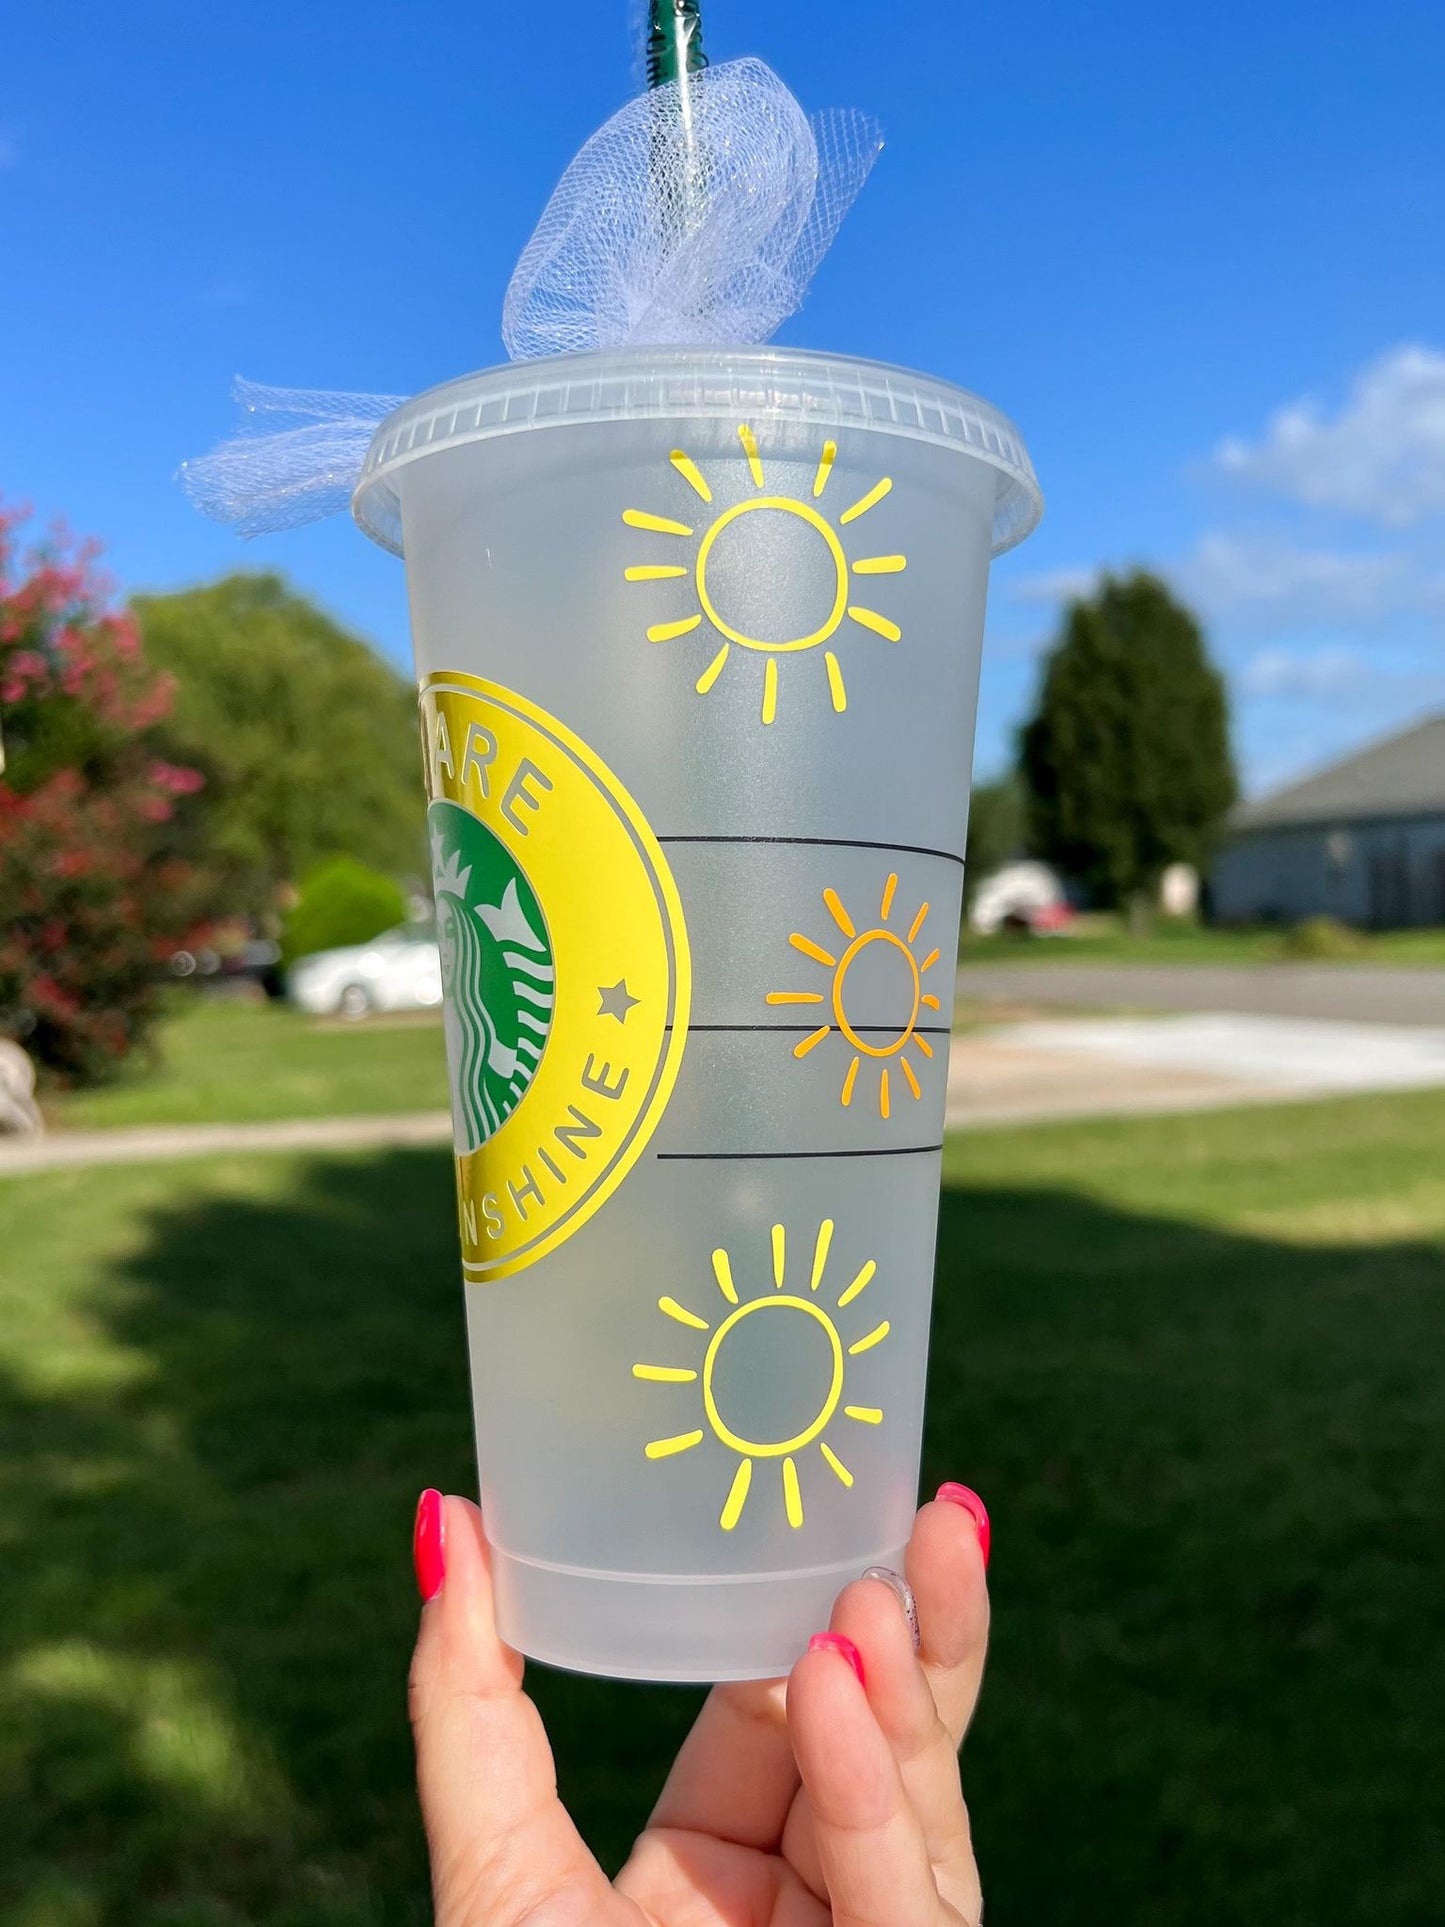 You Are My Sunshine Starbies Cup